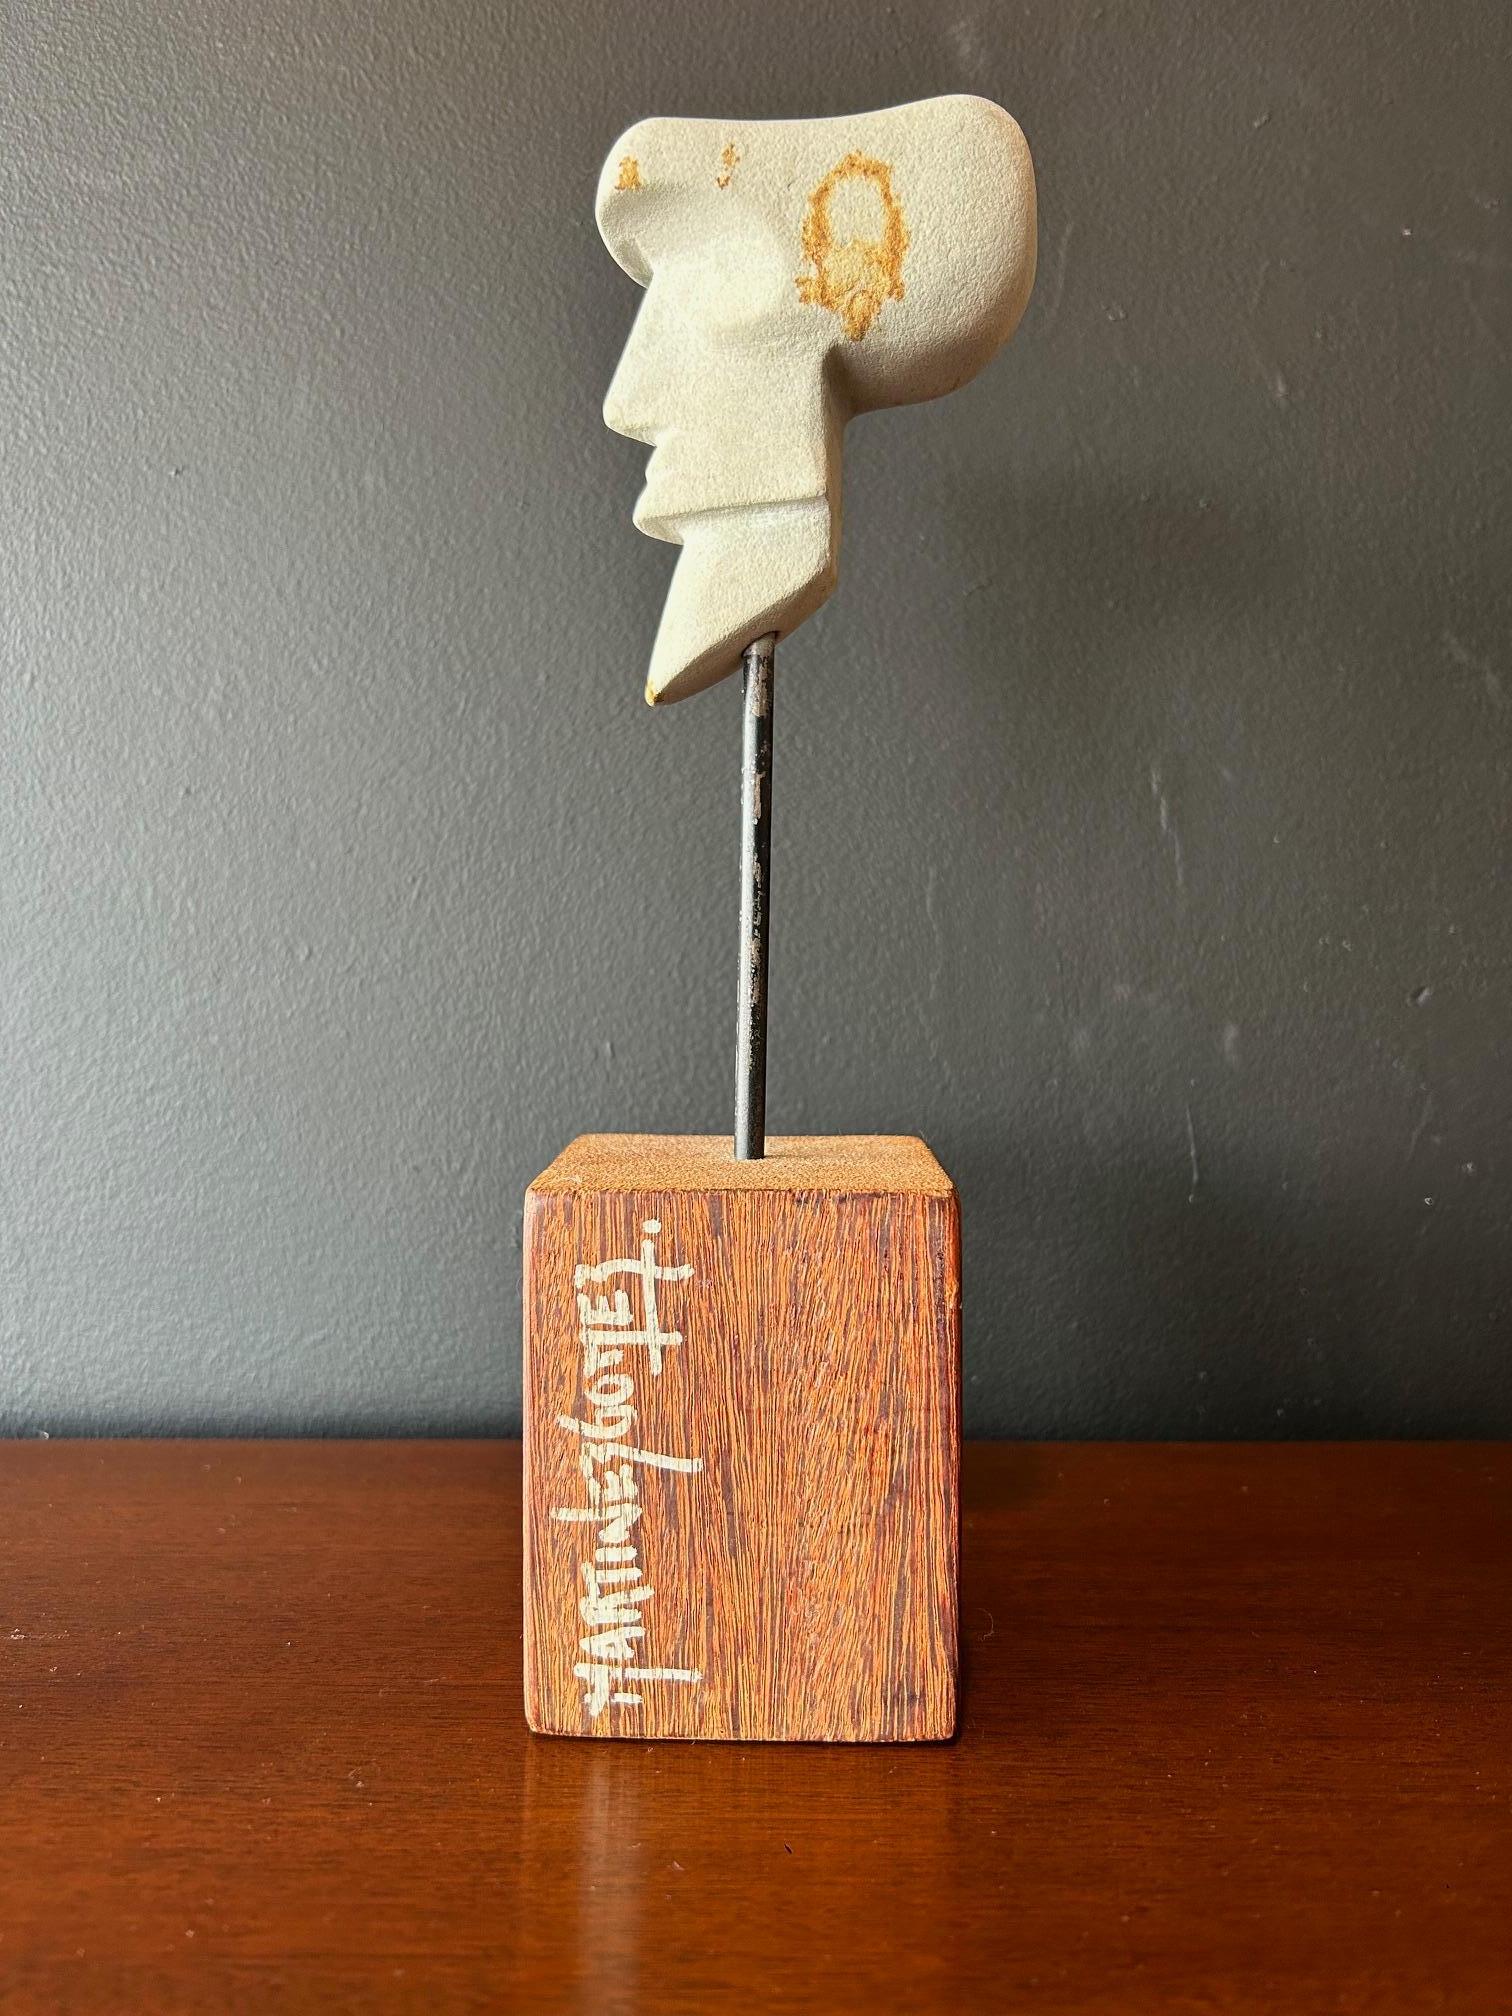 Striking, stylized carved head in white stone mounted to a wood block on an iron pole by Jose Luis Martinez Gomez (signed). 